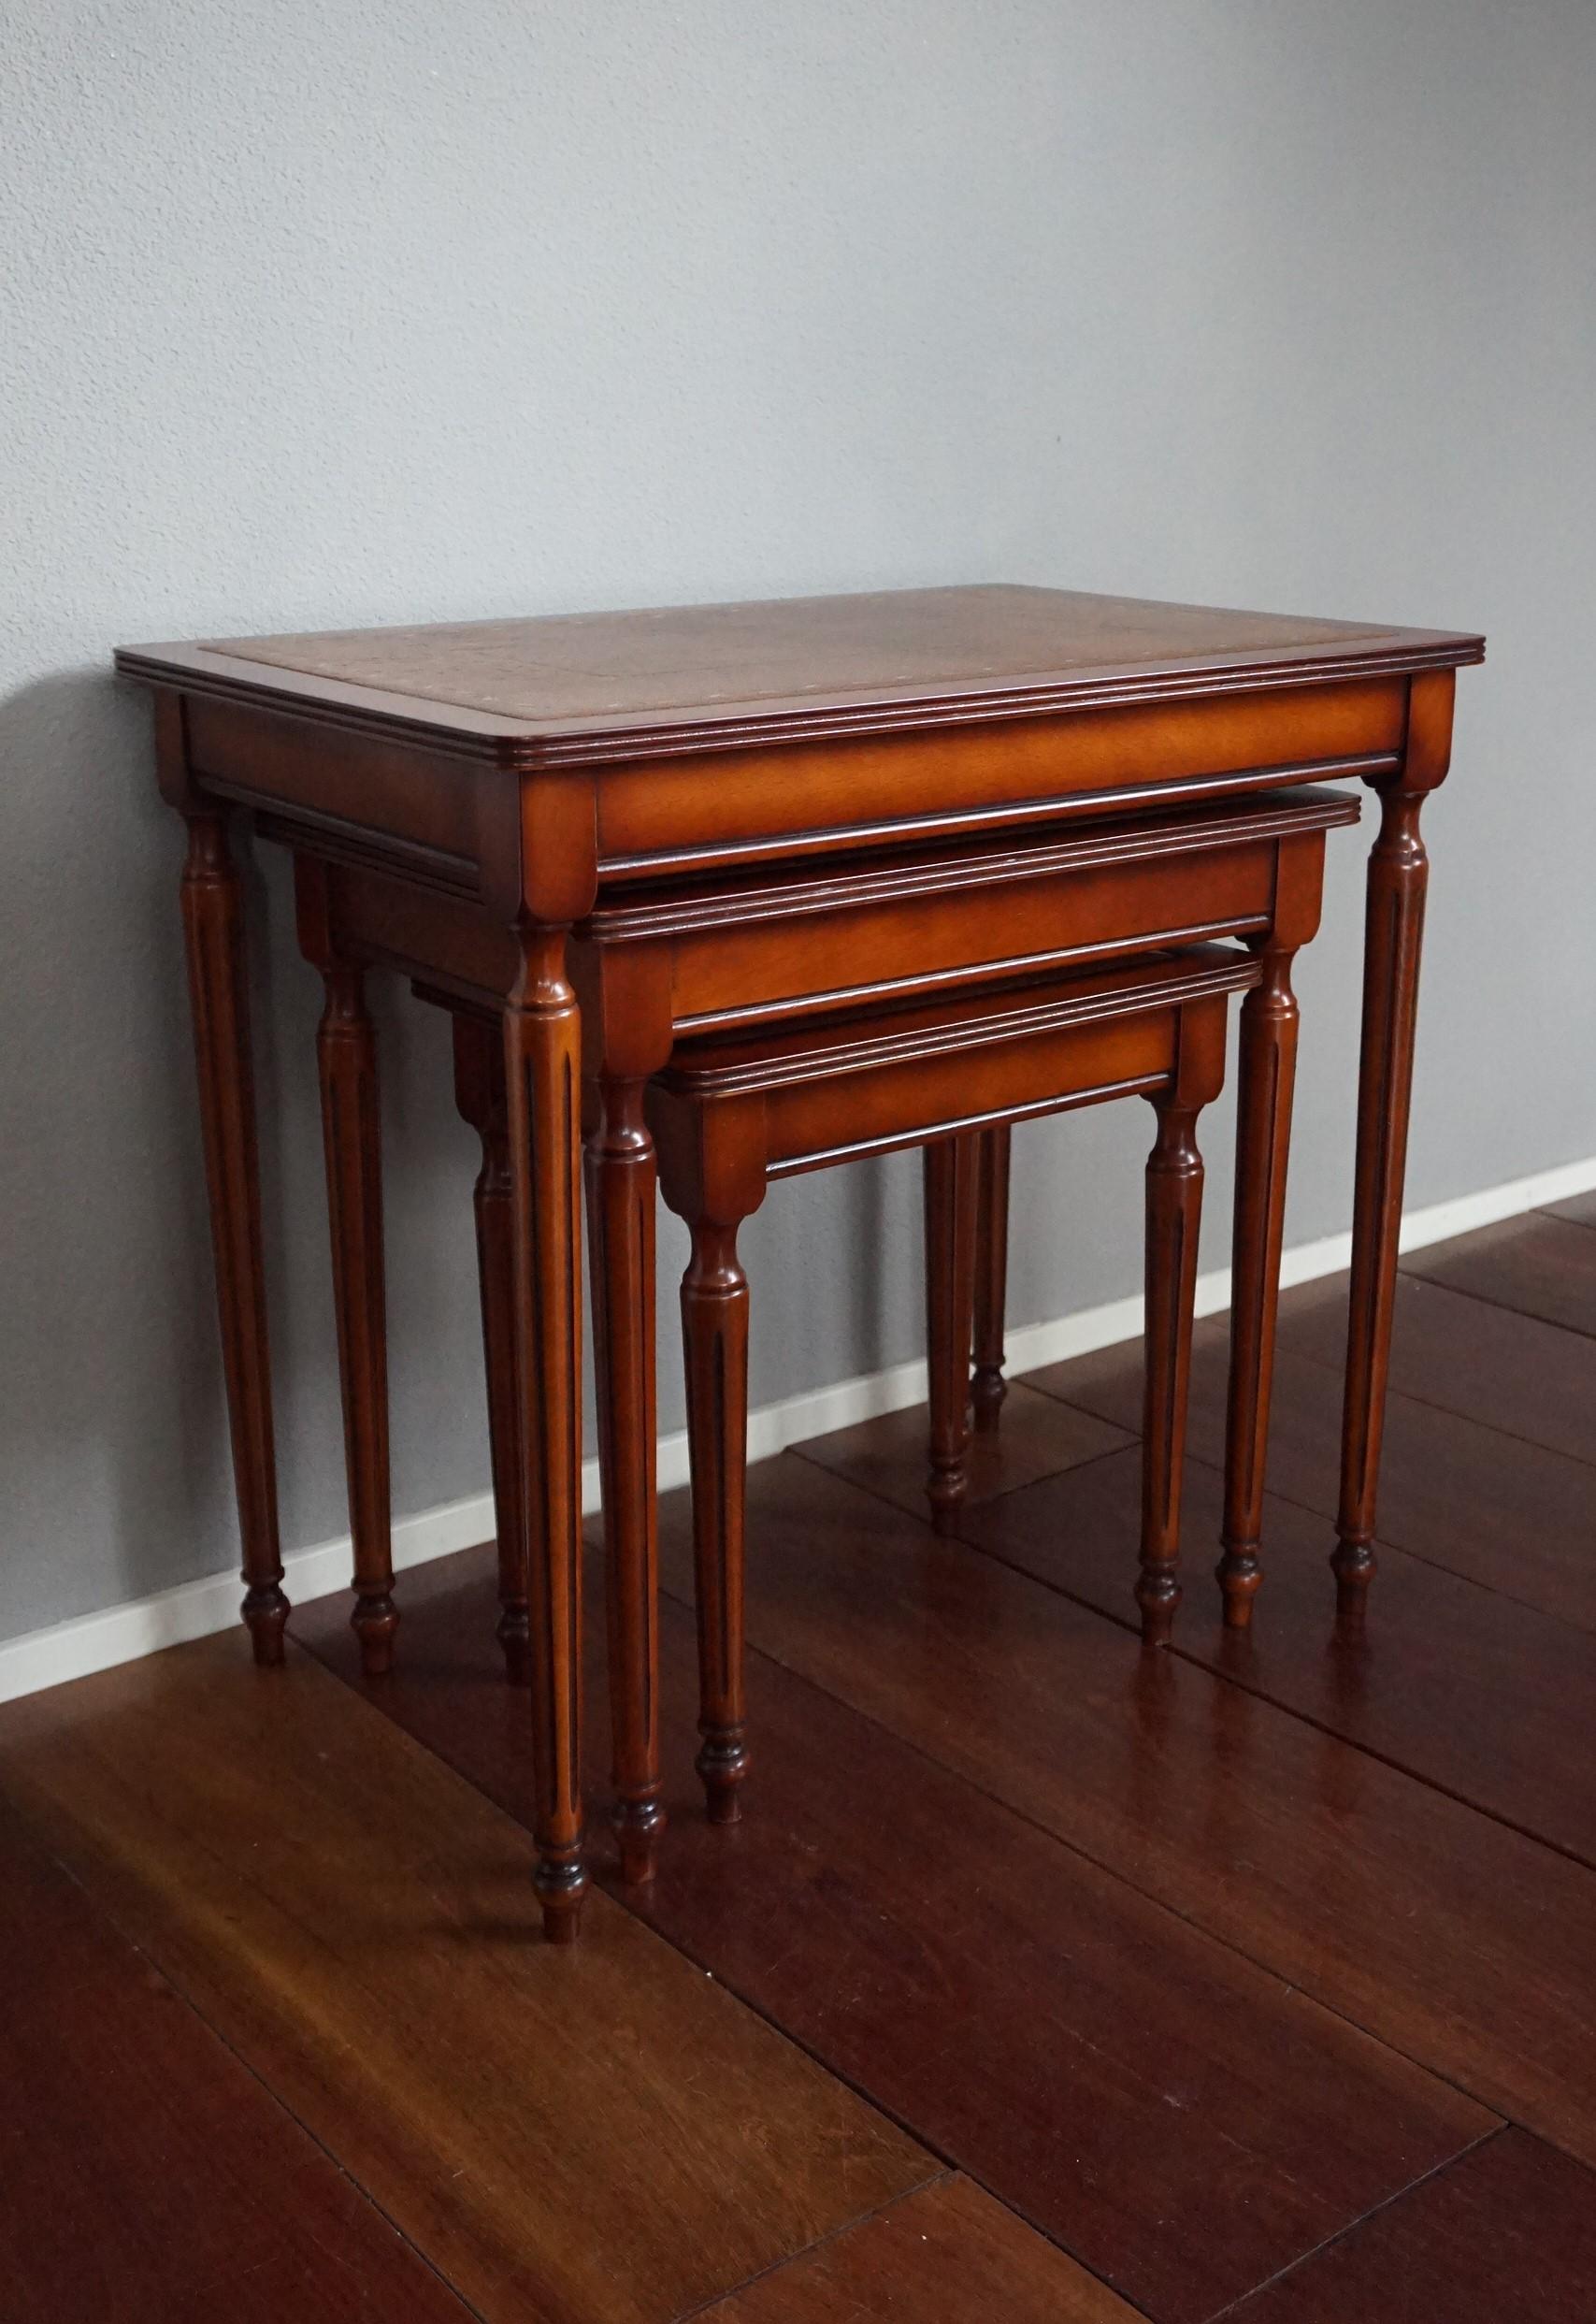 Mint condition and highly stylish nest of practical tables.

This stylish and highly practical nest of tables is inlaid with top quality leather and all three tables are in excellent condition. The combination of the striking wood and the warm